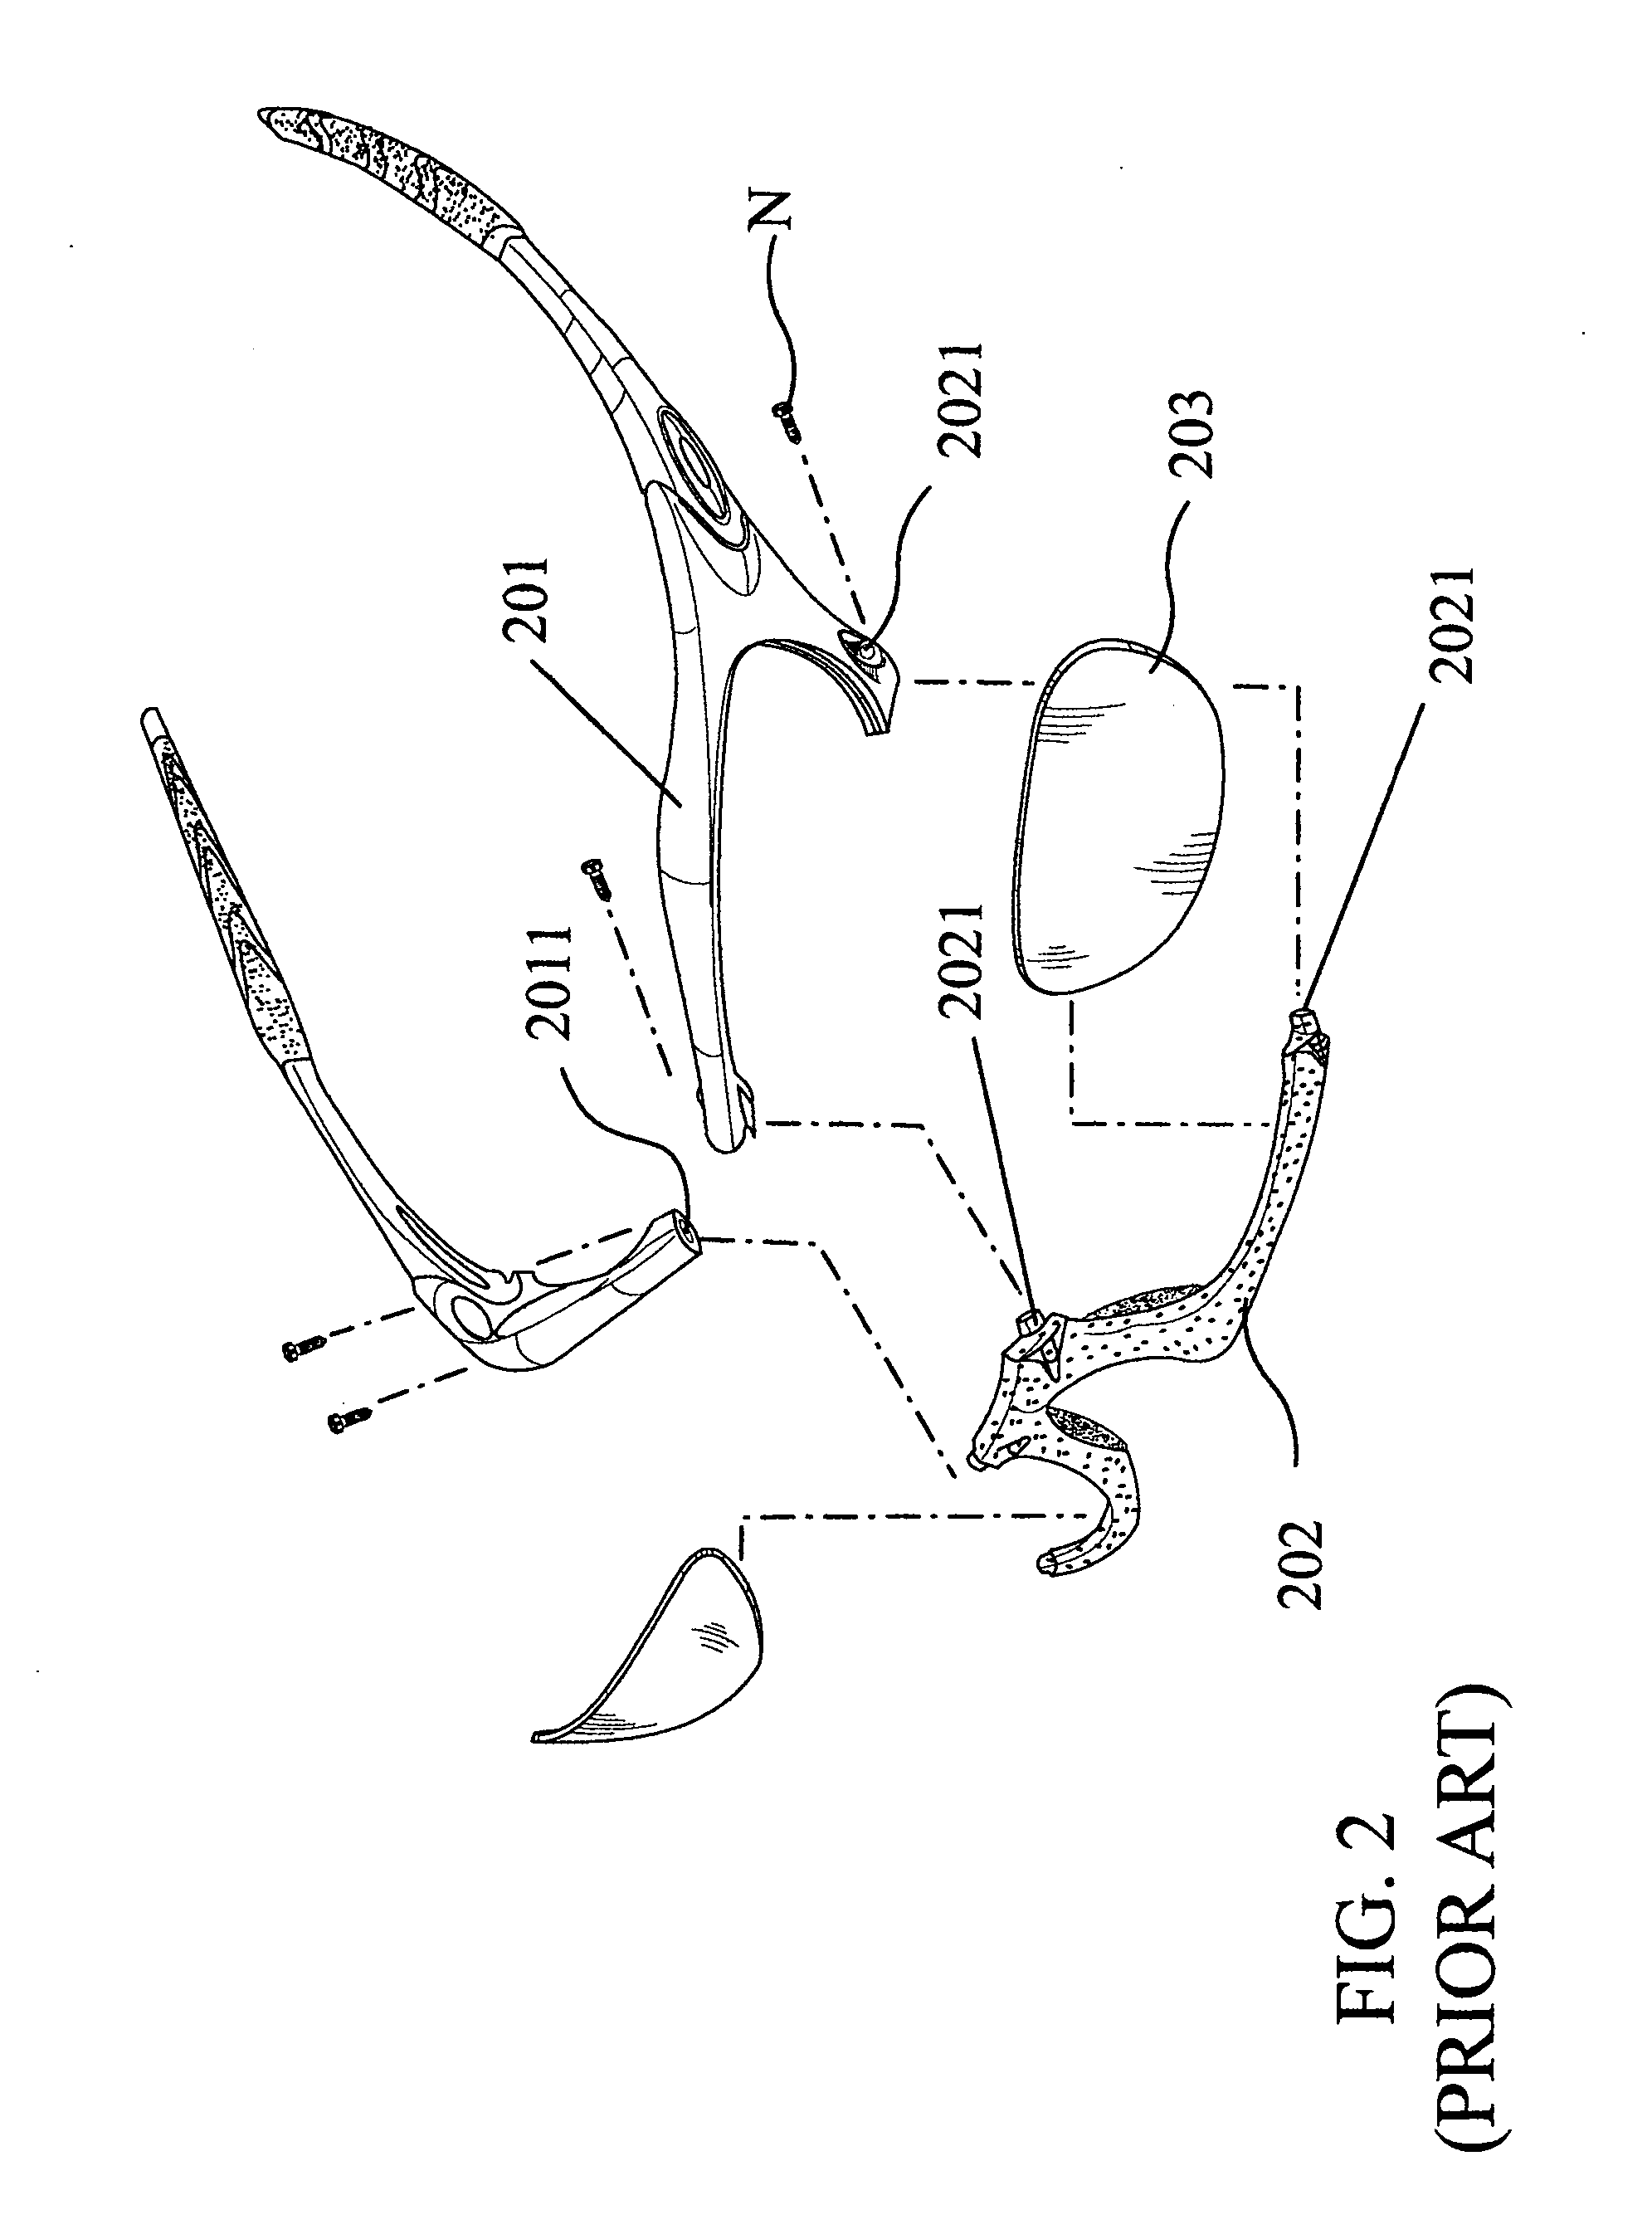 Eyeglass assembly and coupling system